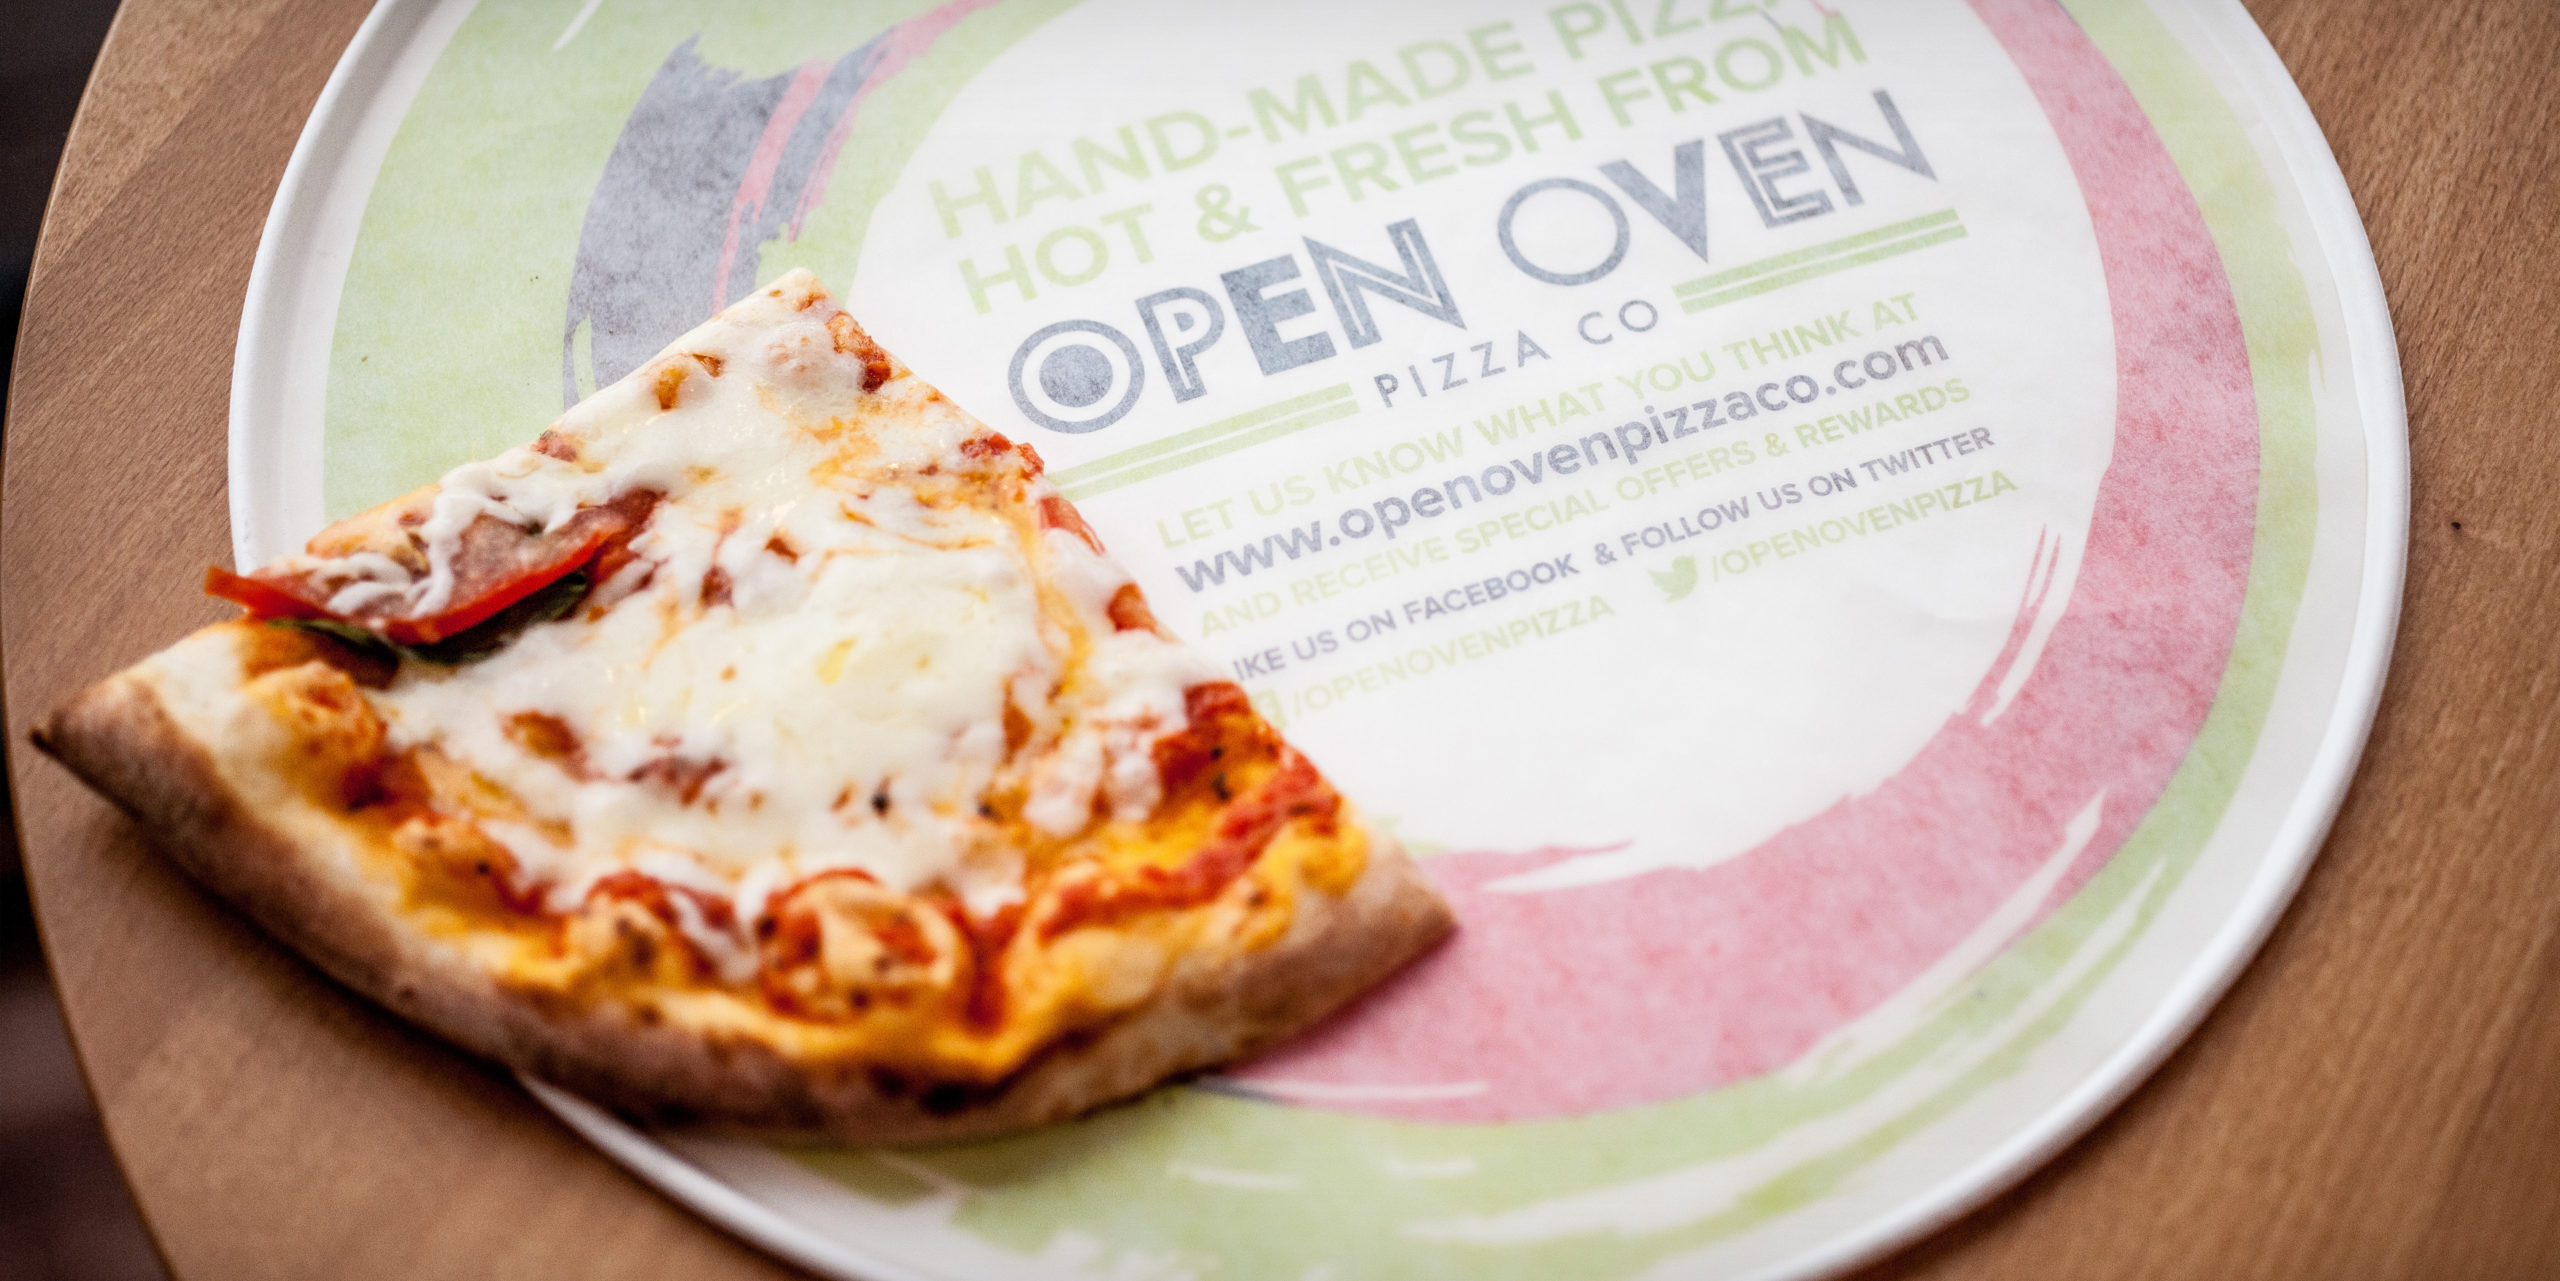 Open Oven Pizza Co Branding by Toast Food